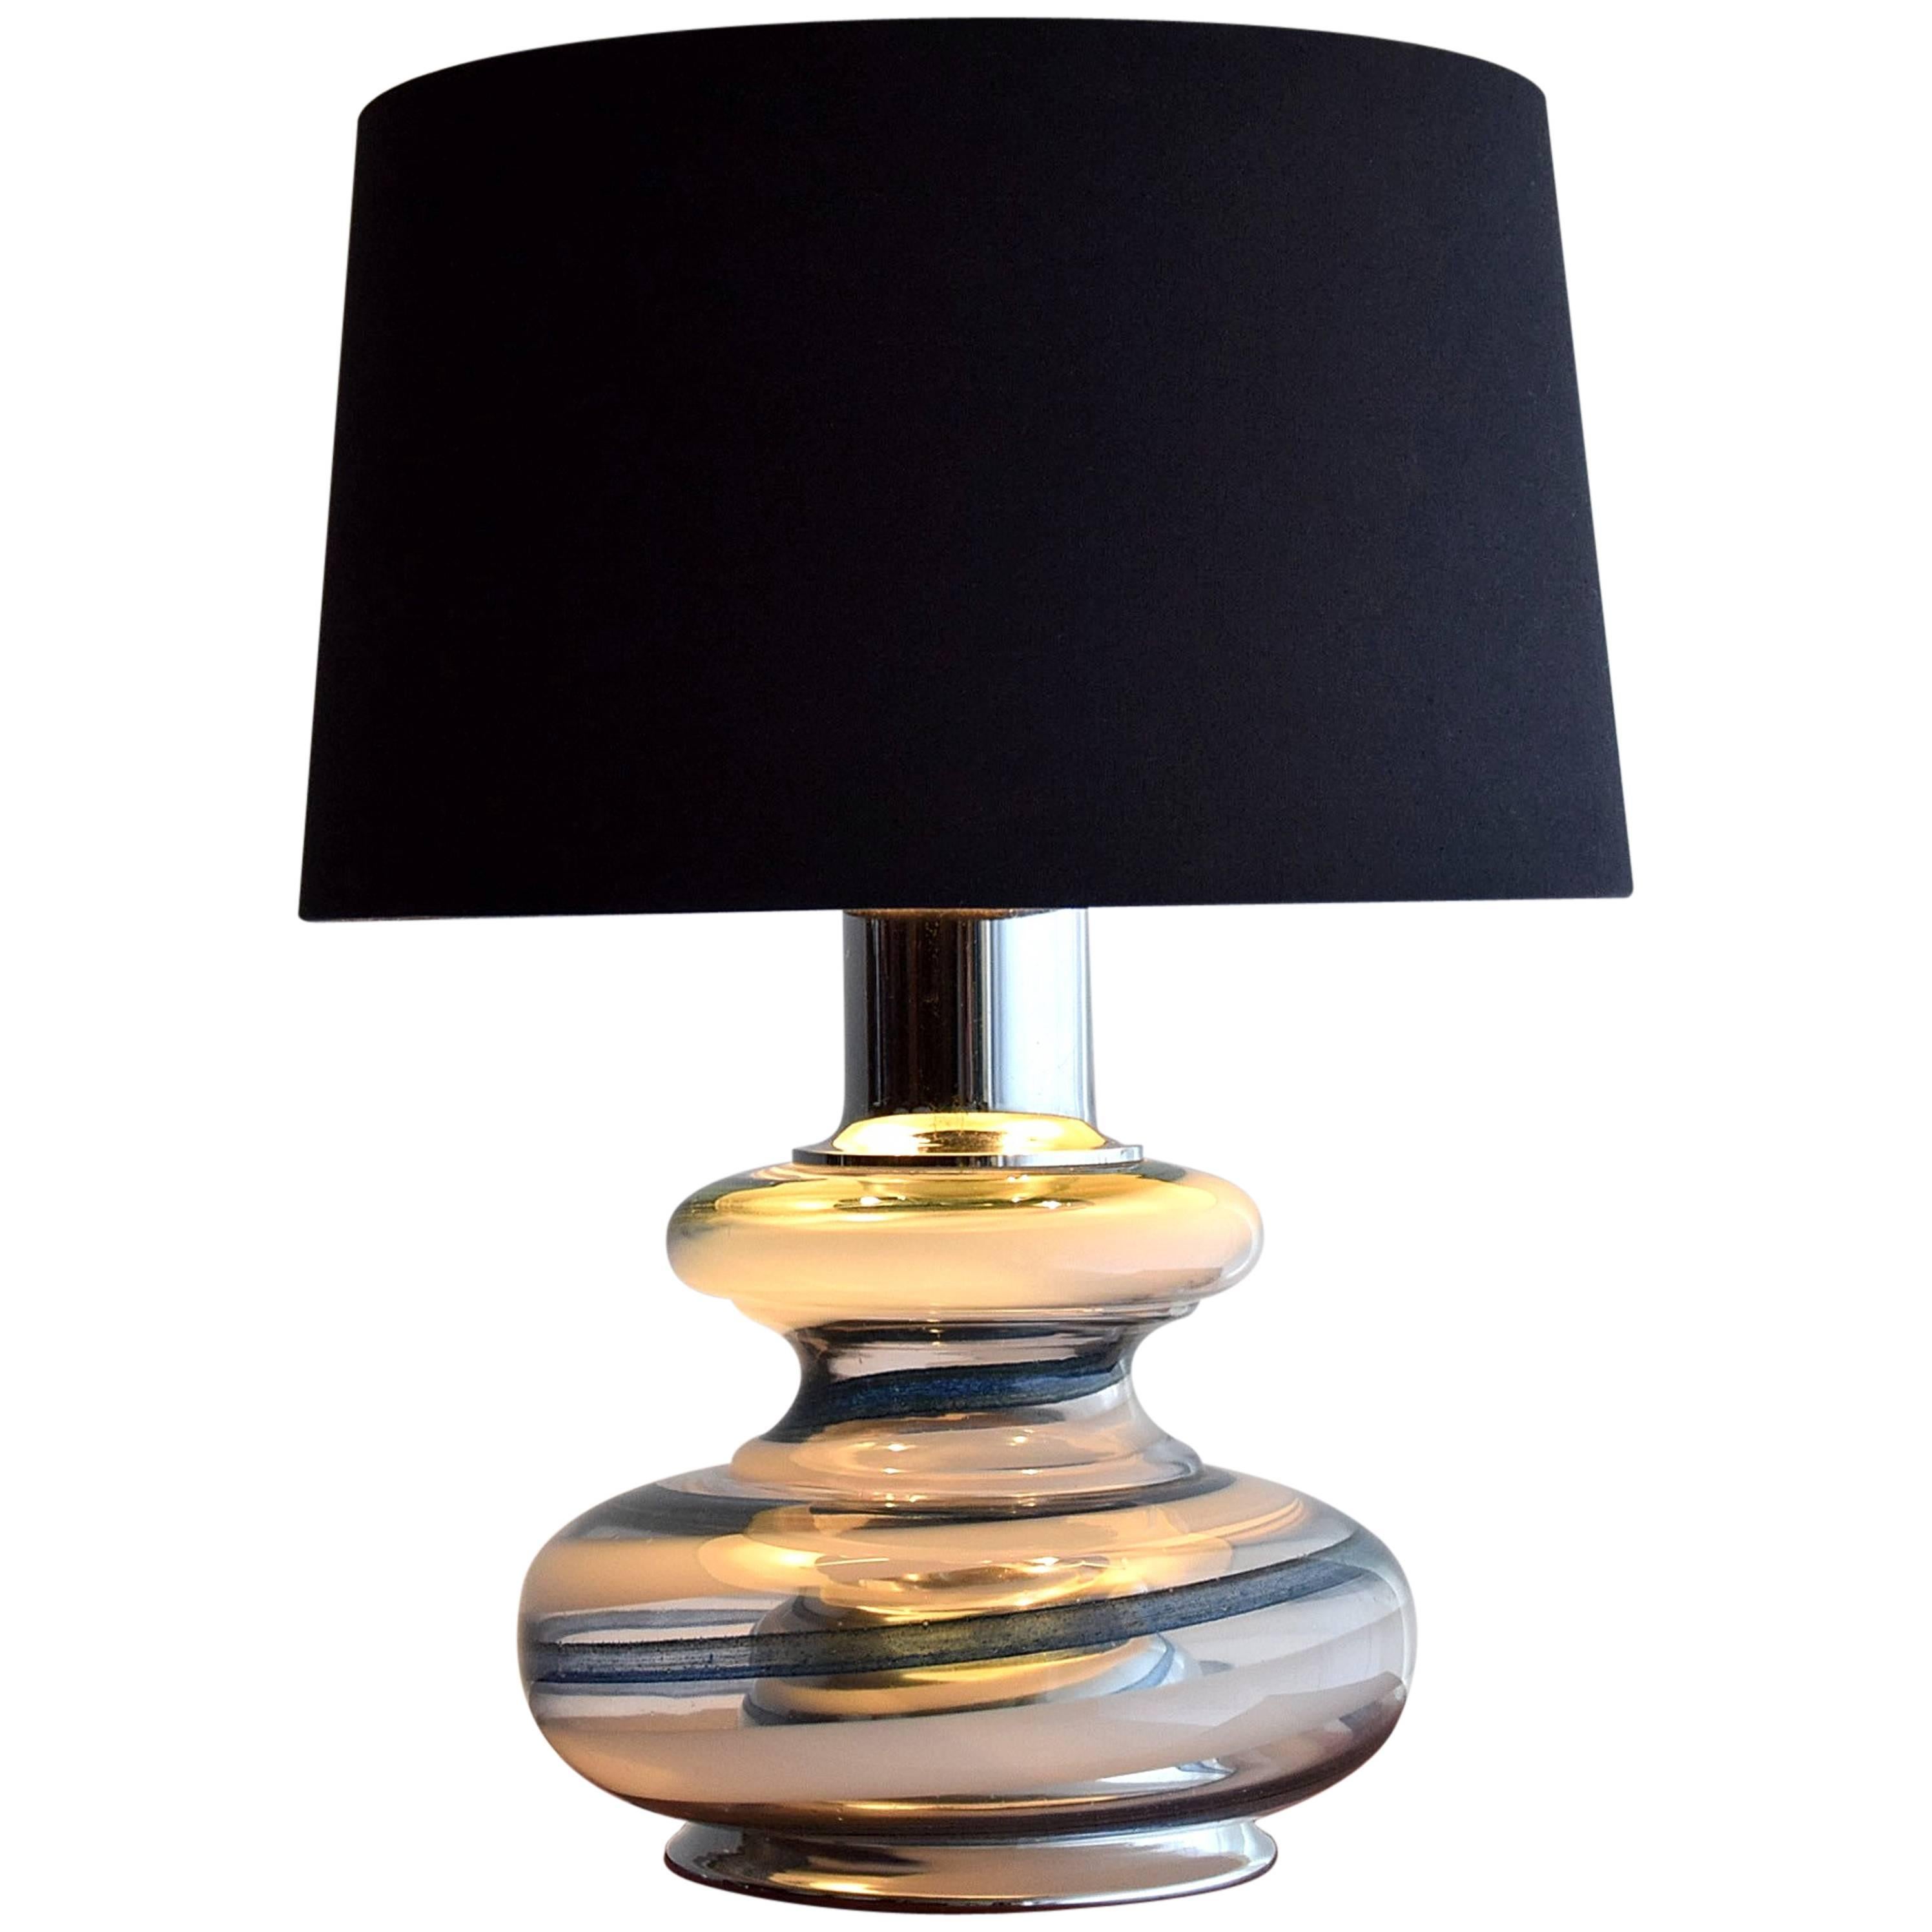 Handblown 1970s Table Lamp by BD Lumica, Barcelona For Sale